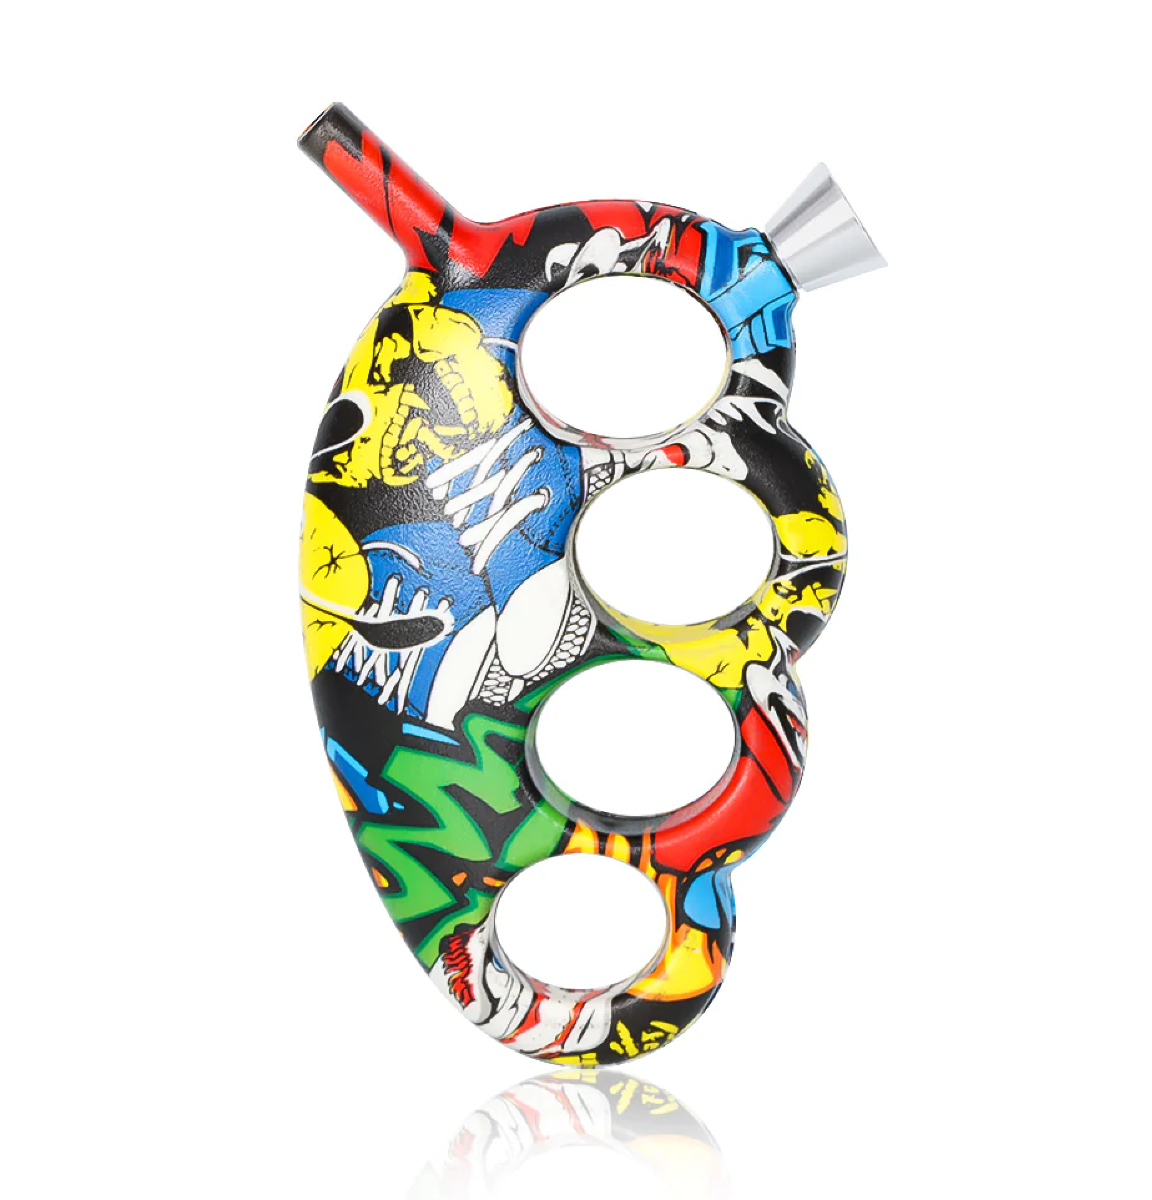 Mr Joint Acrylic Knuckle Duster Bubbler